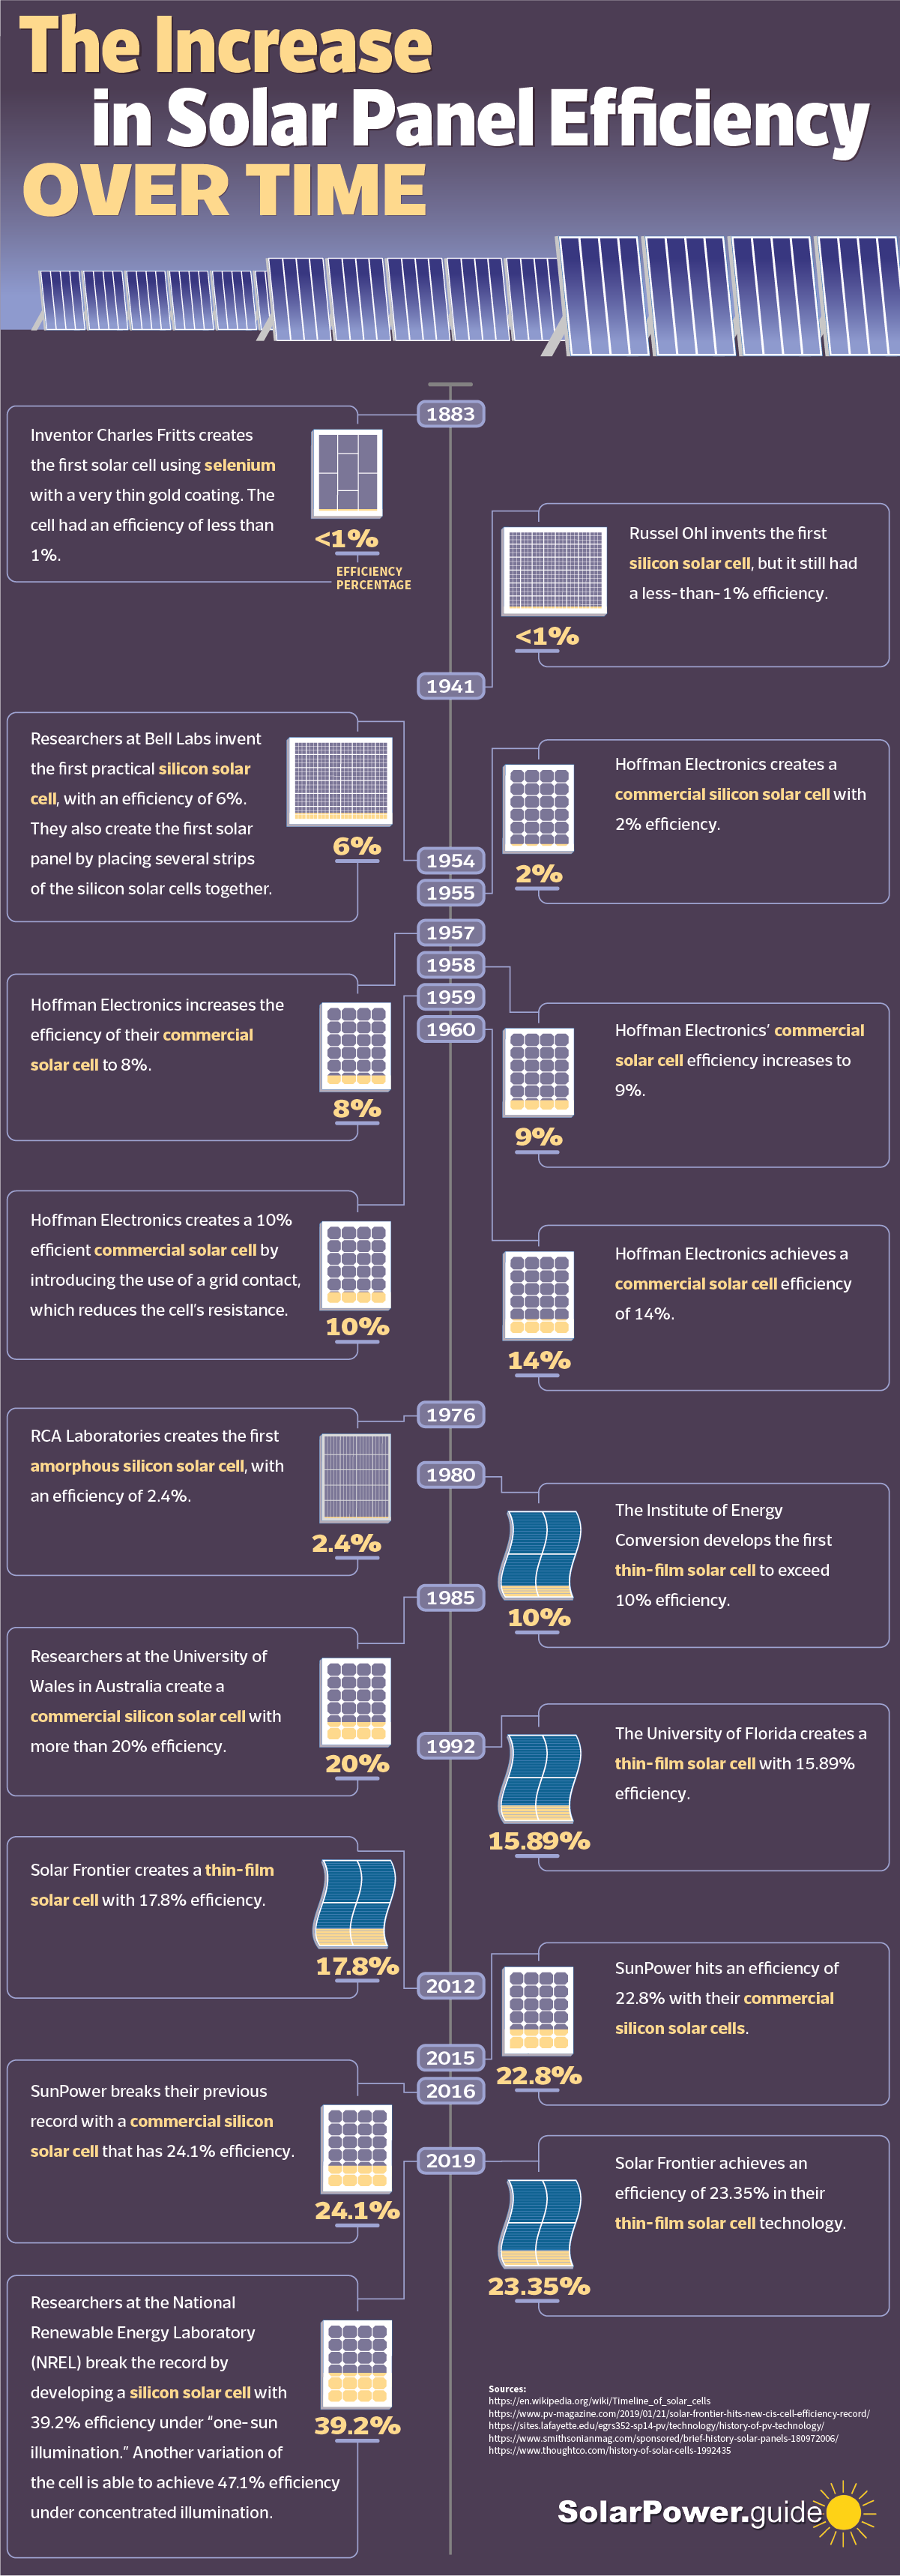 The Increase in Solar Panel Efficiency Over Time